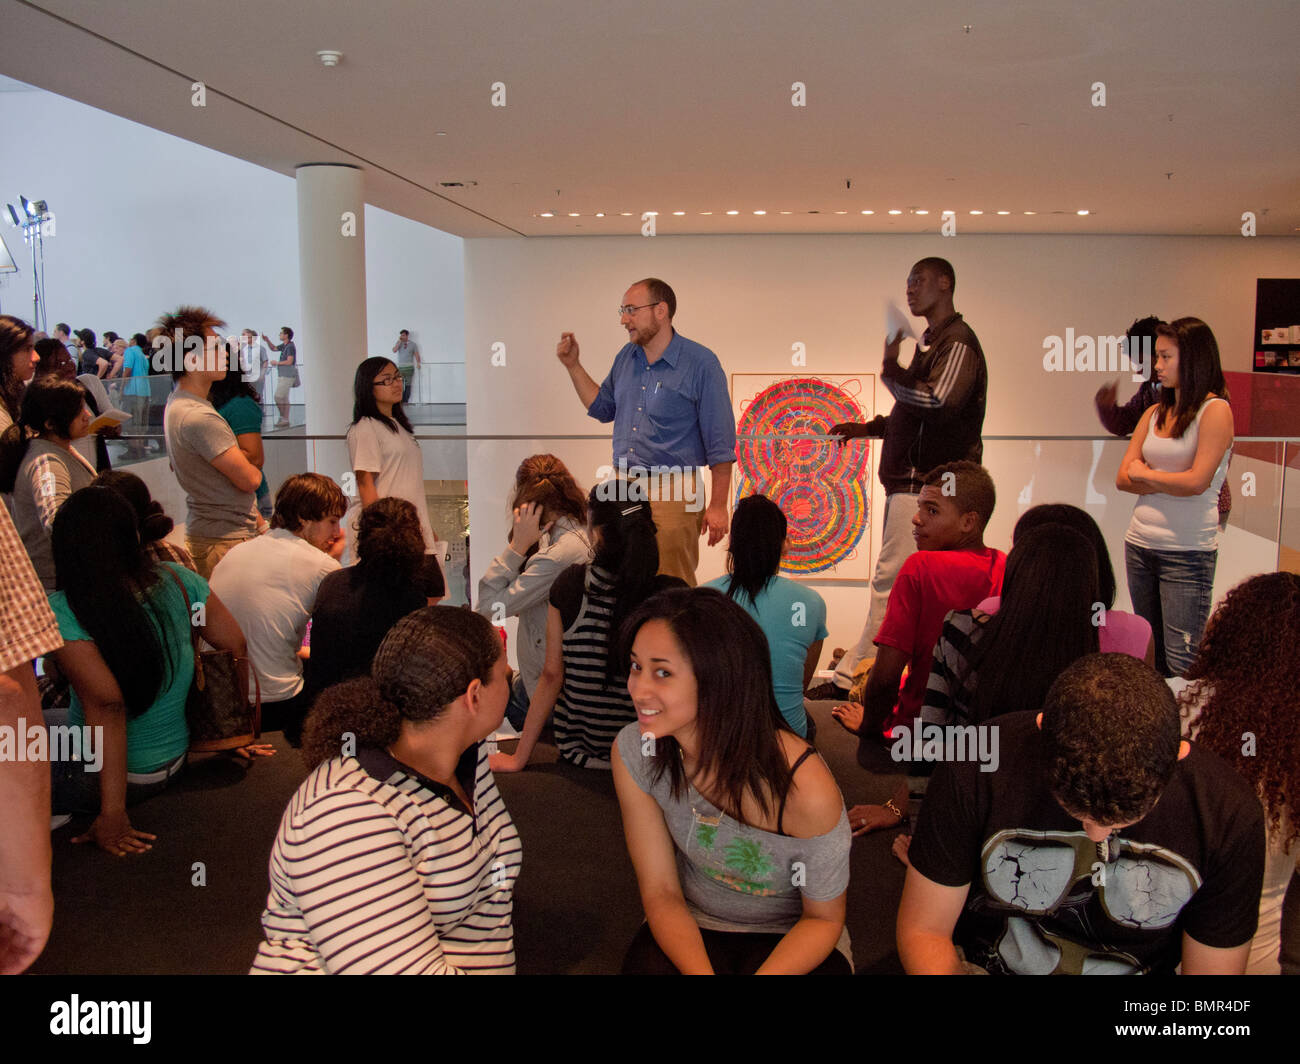 Explaining exhibits, a guide (center background) takes visitors through the Museum of Modern Art in New York City. Stock Photo